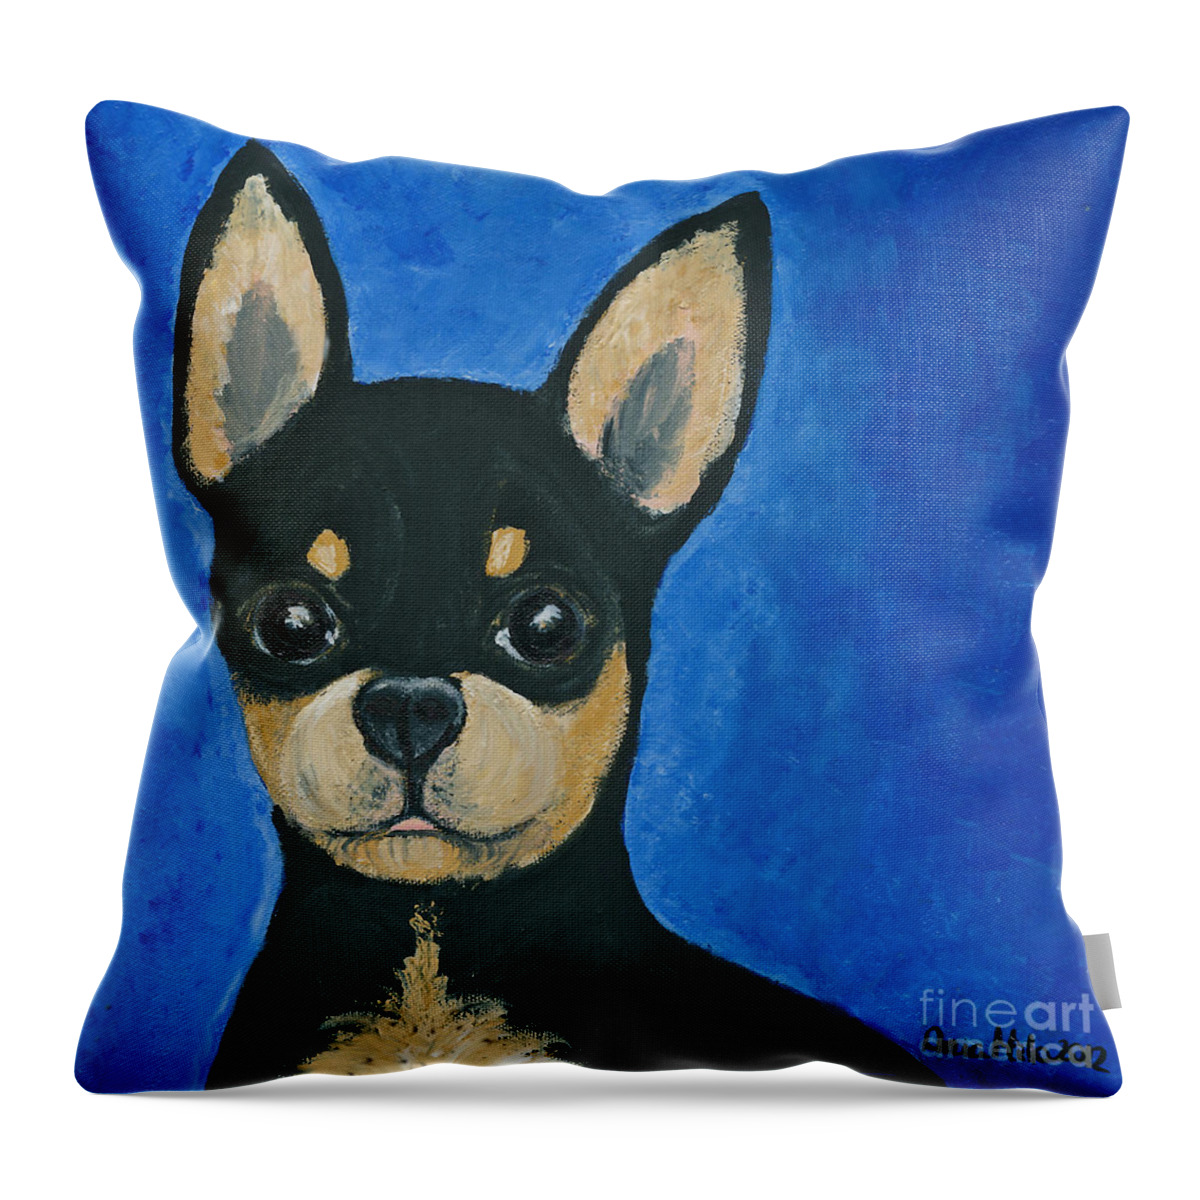 Chihuahua Throw Pillow featuring the painting Little BigBoy by Ania M Milo